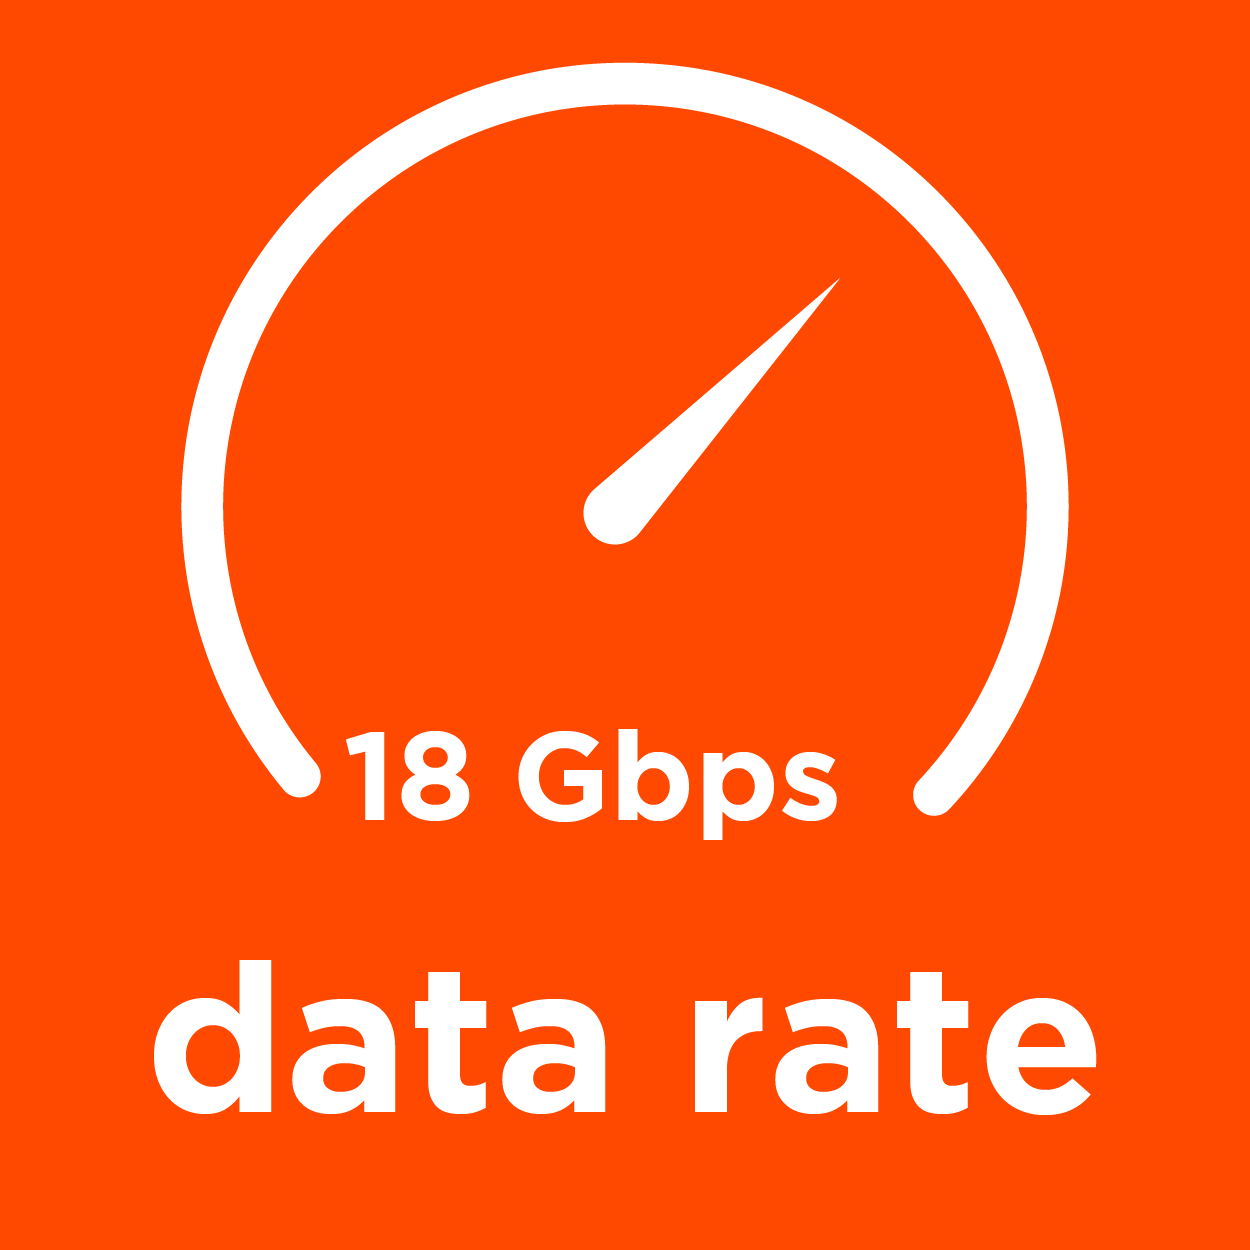 datenrate_18gbps.png